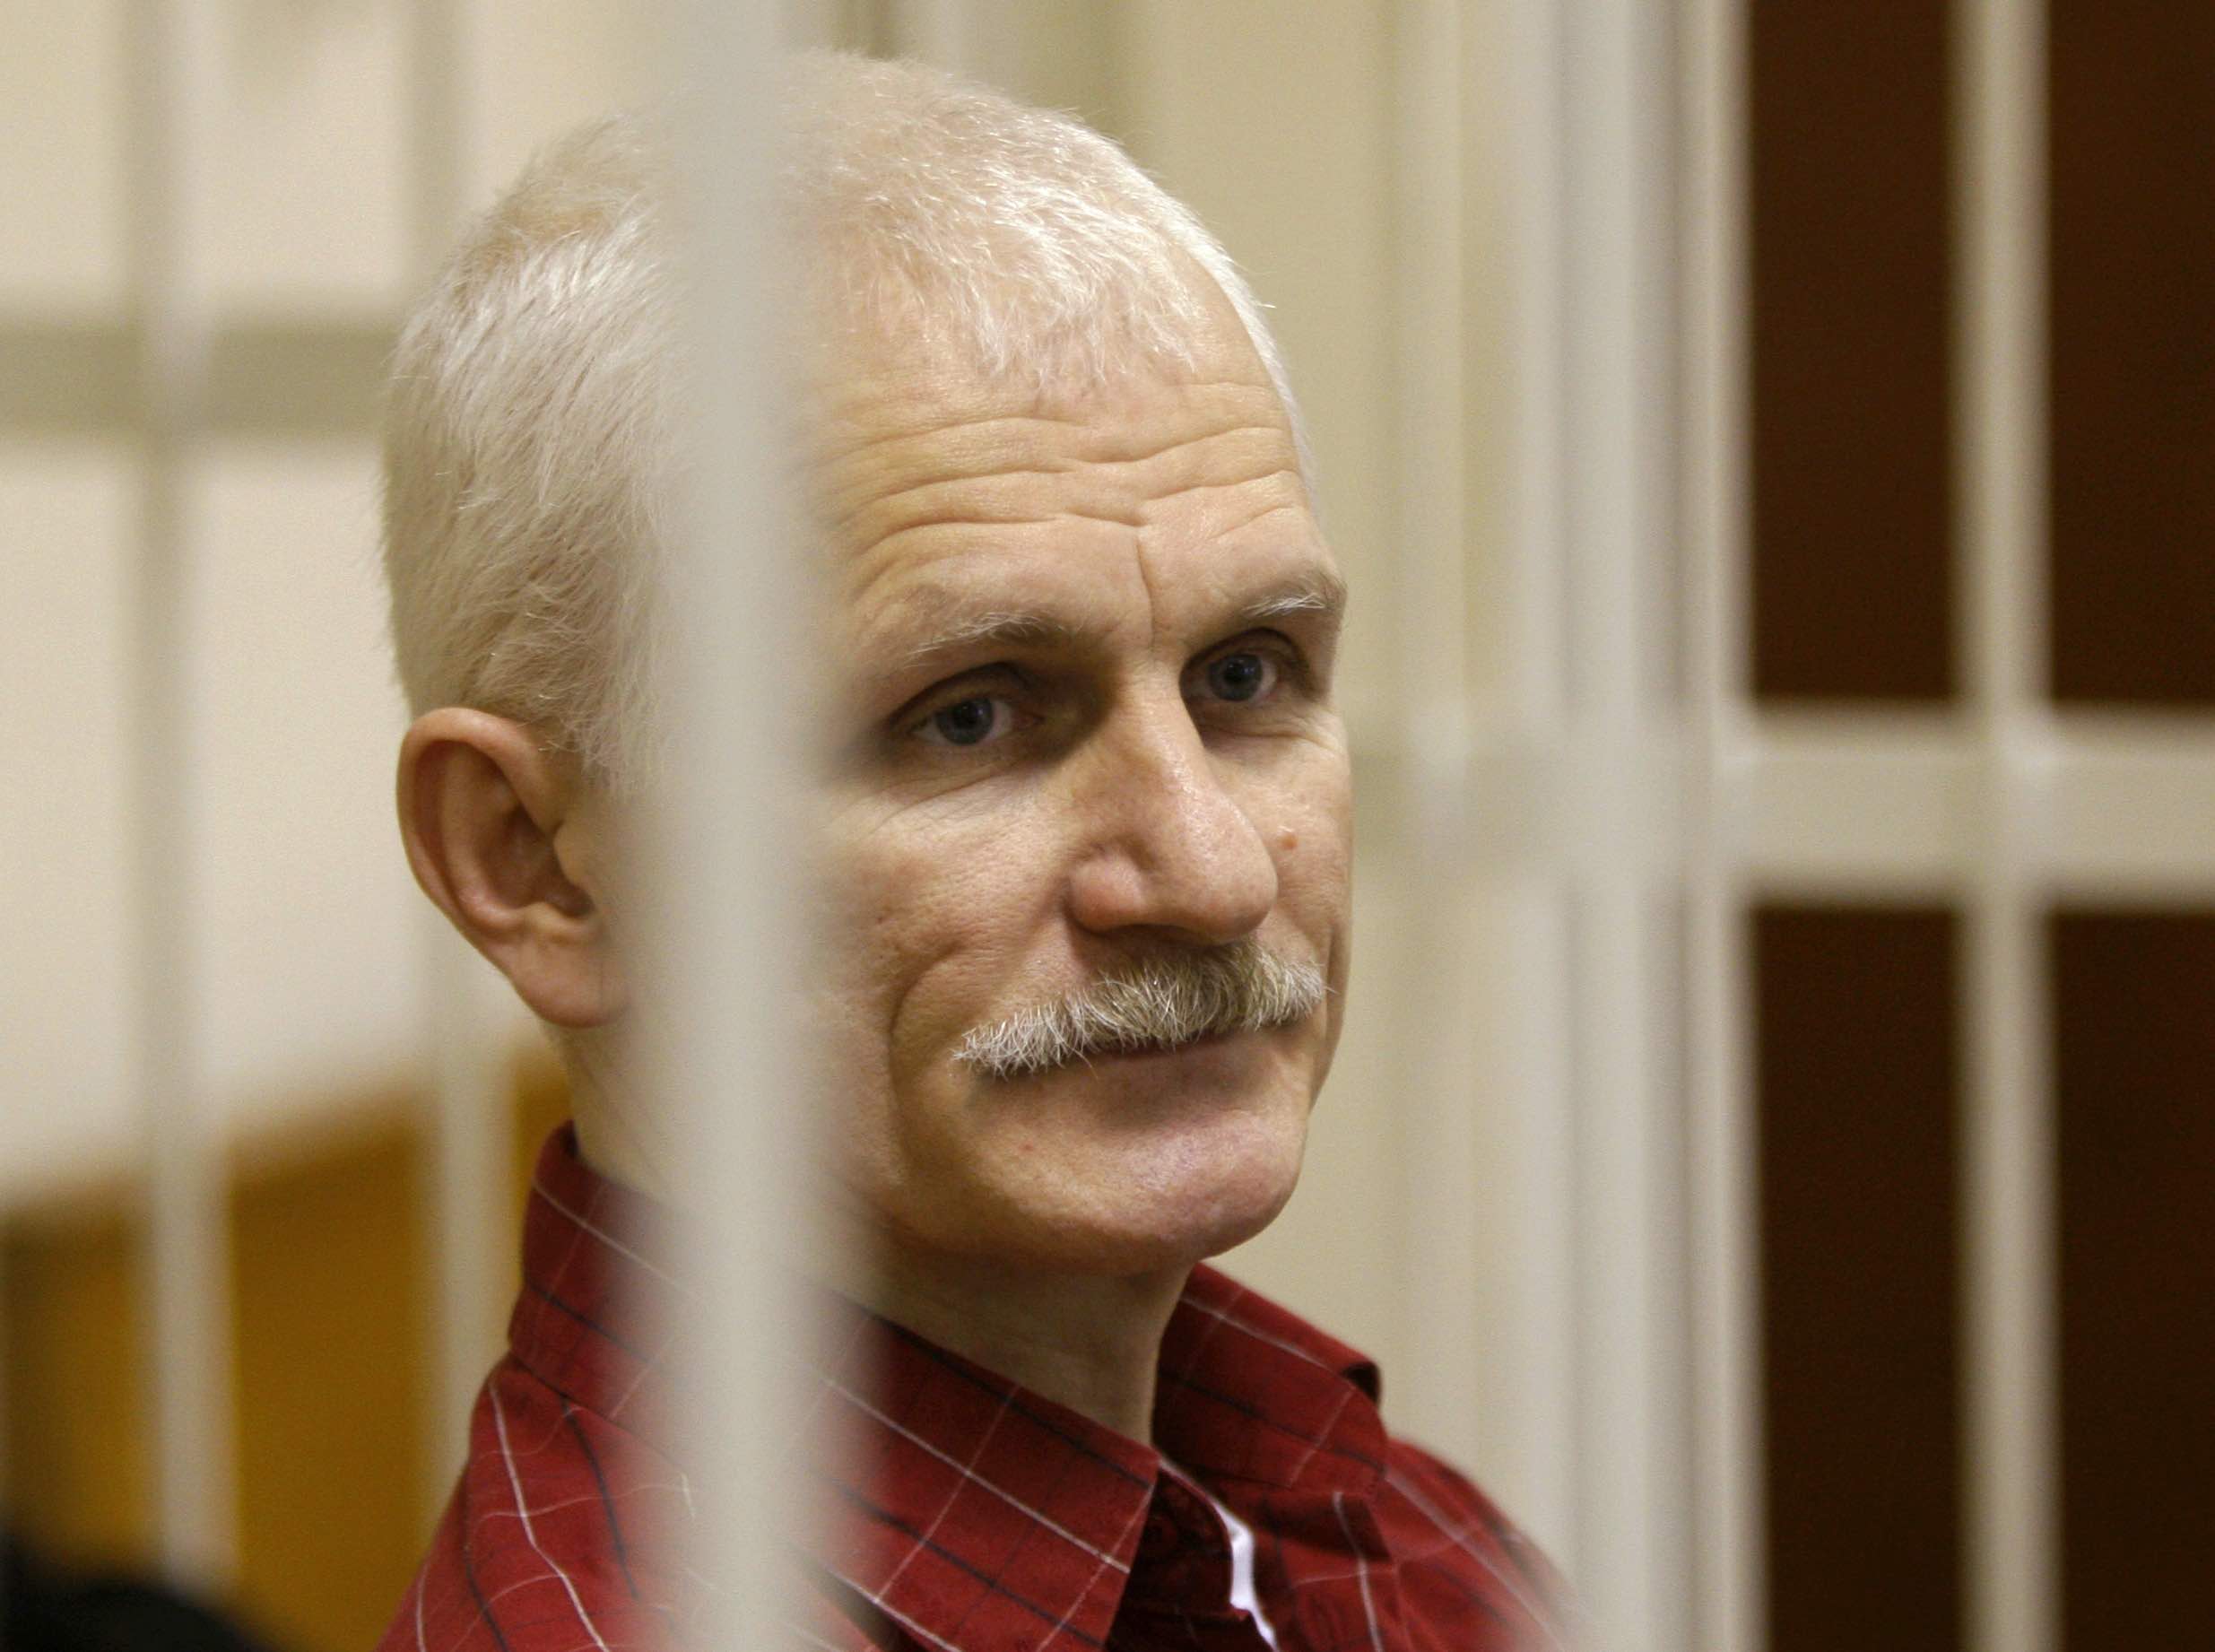 Ales Bialiatski, the head of Belarusian Vyasna rights group, stands in a defendants' cage during a court session in Minsk, Belarus, on Wednesday, Nov. 2, 2011. On Friday, Oct. 7, 2022 the Nobel Peace Prize was awarded to jailed Belarus rights activist Ales Bialiatski, the Russian group Memorial, and the Ukrainian organization Center for Civil Liberties. (Sergei Grits—AP Photo)